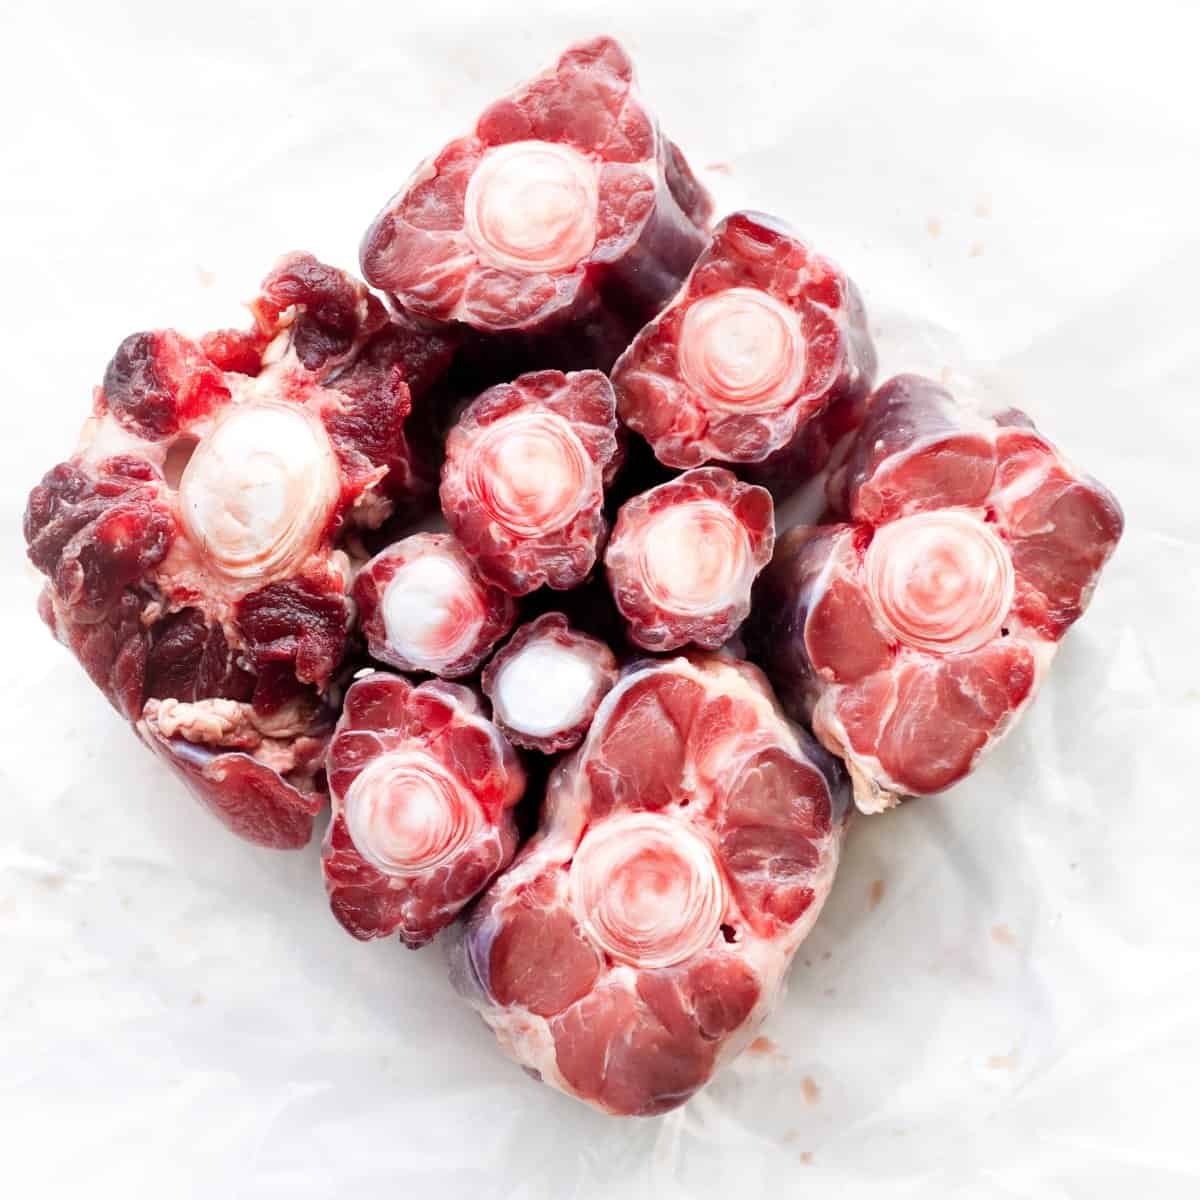 What is oxtail